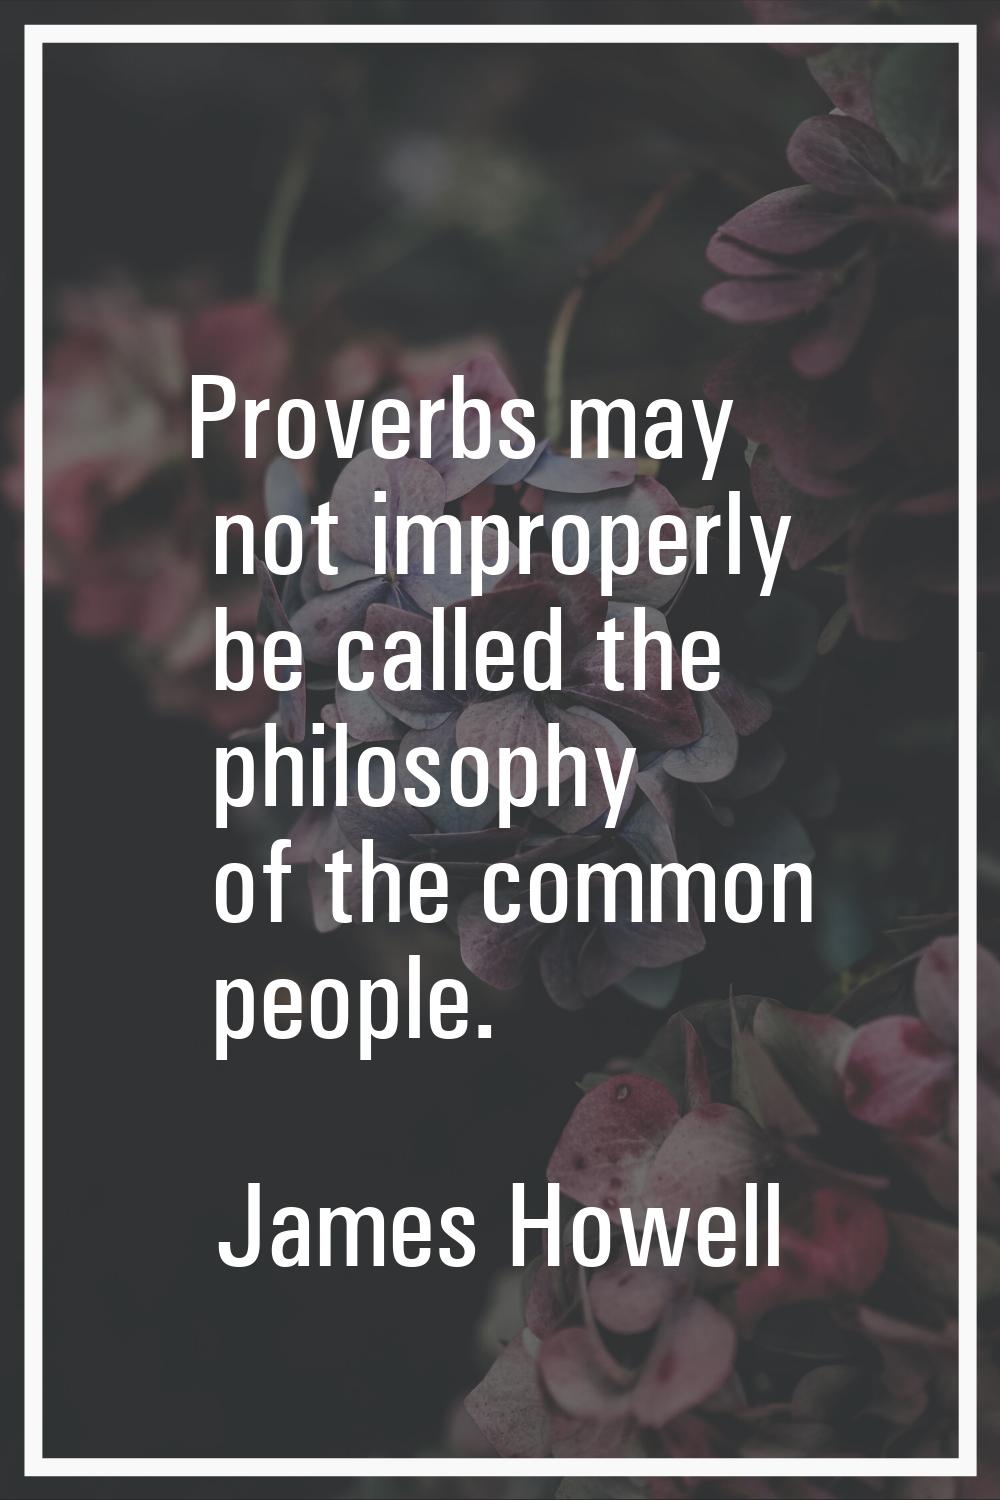 Proverbs may not improperly be called the philosophy of the common people.